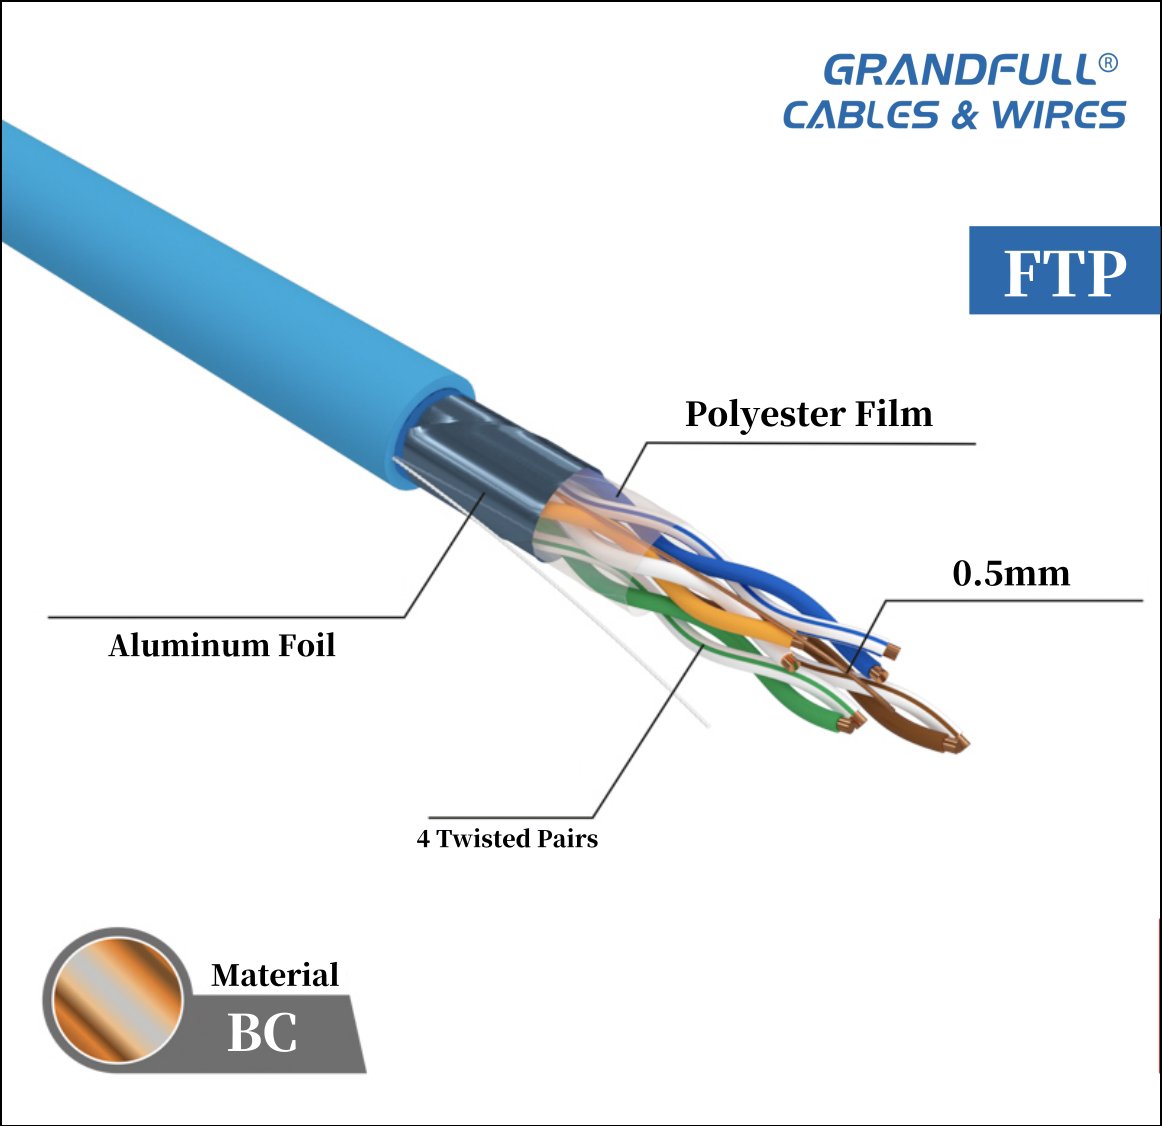 Cat5/Cat6/Cat7 Copper/CCA 23awg/24awg Jacket Color OEM Packing Box OEM Web：www.grandfullcable. com Email: manage@forcan.com #cat5 #cat6 #cat6a #cat7 #cable #network #computer #datacenter #cabling #fiberoptic #telecomunicaciones #internet #wifisolutions #networking #network